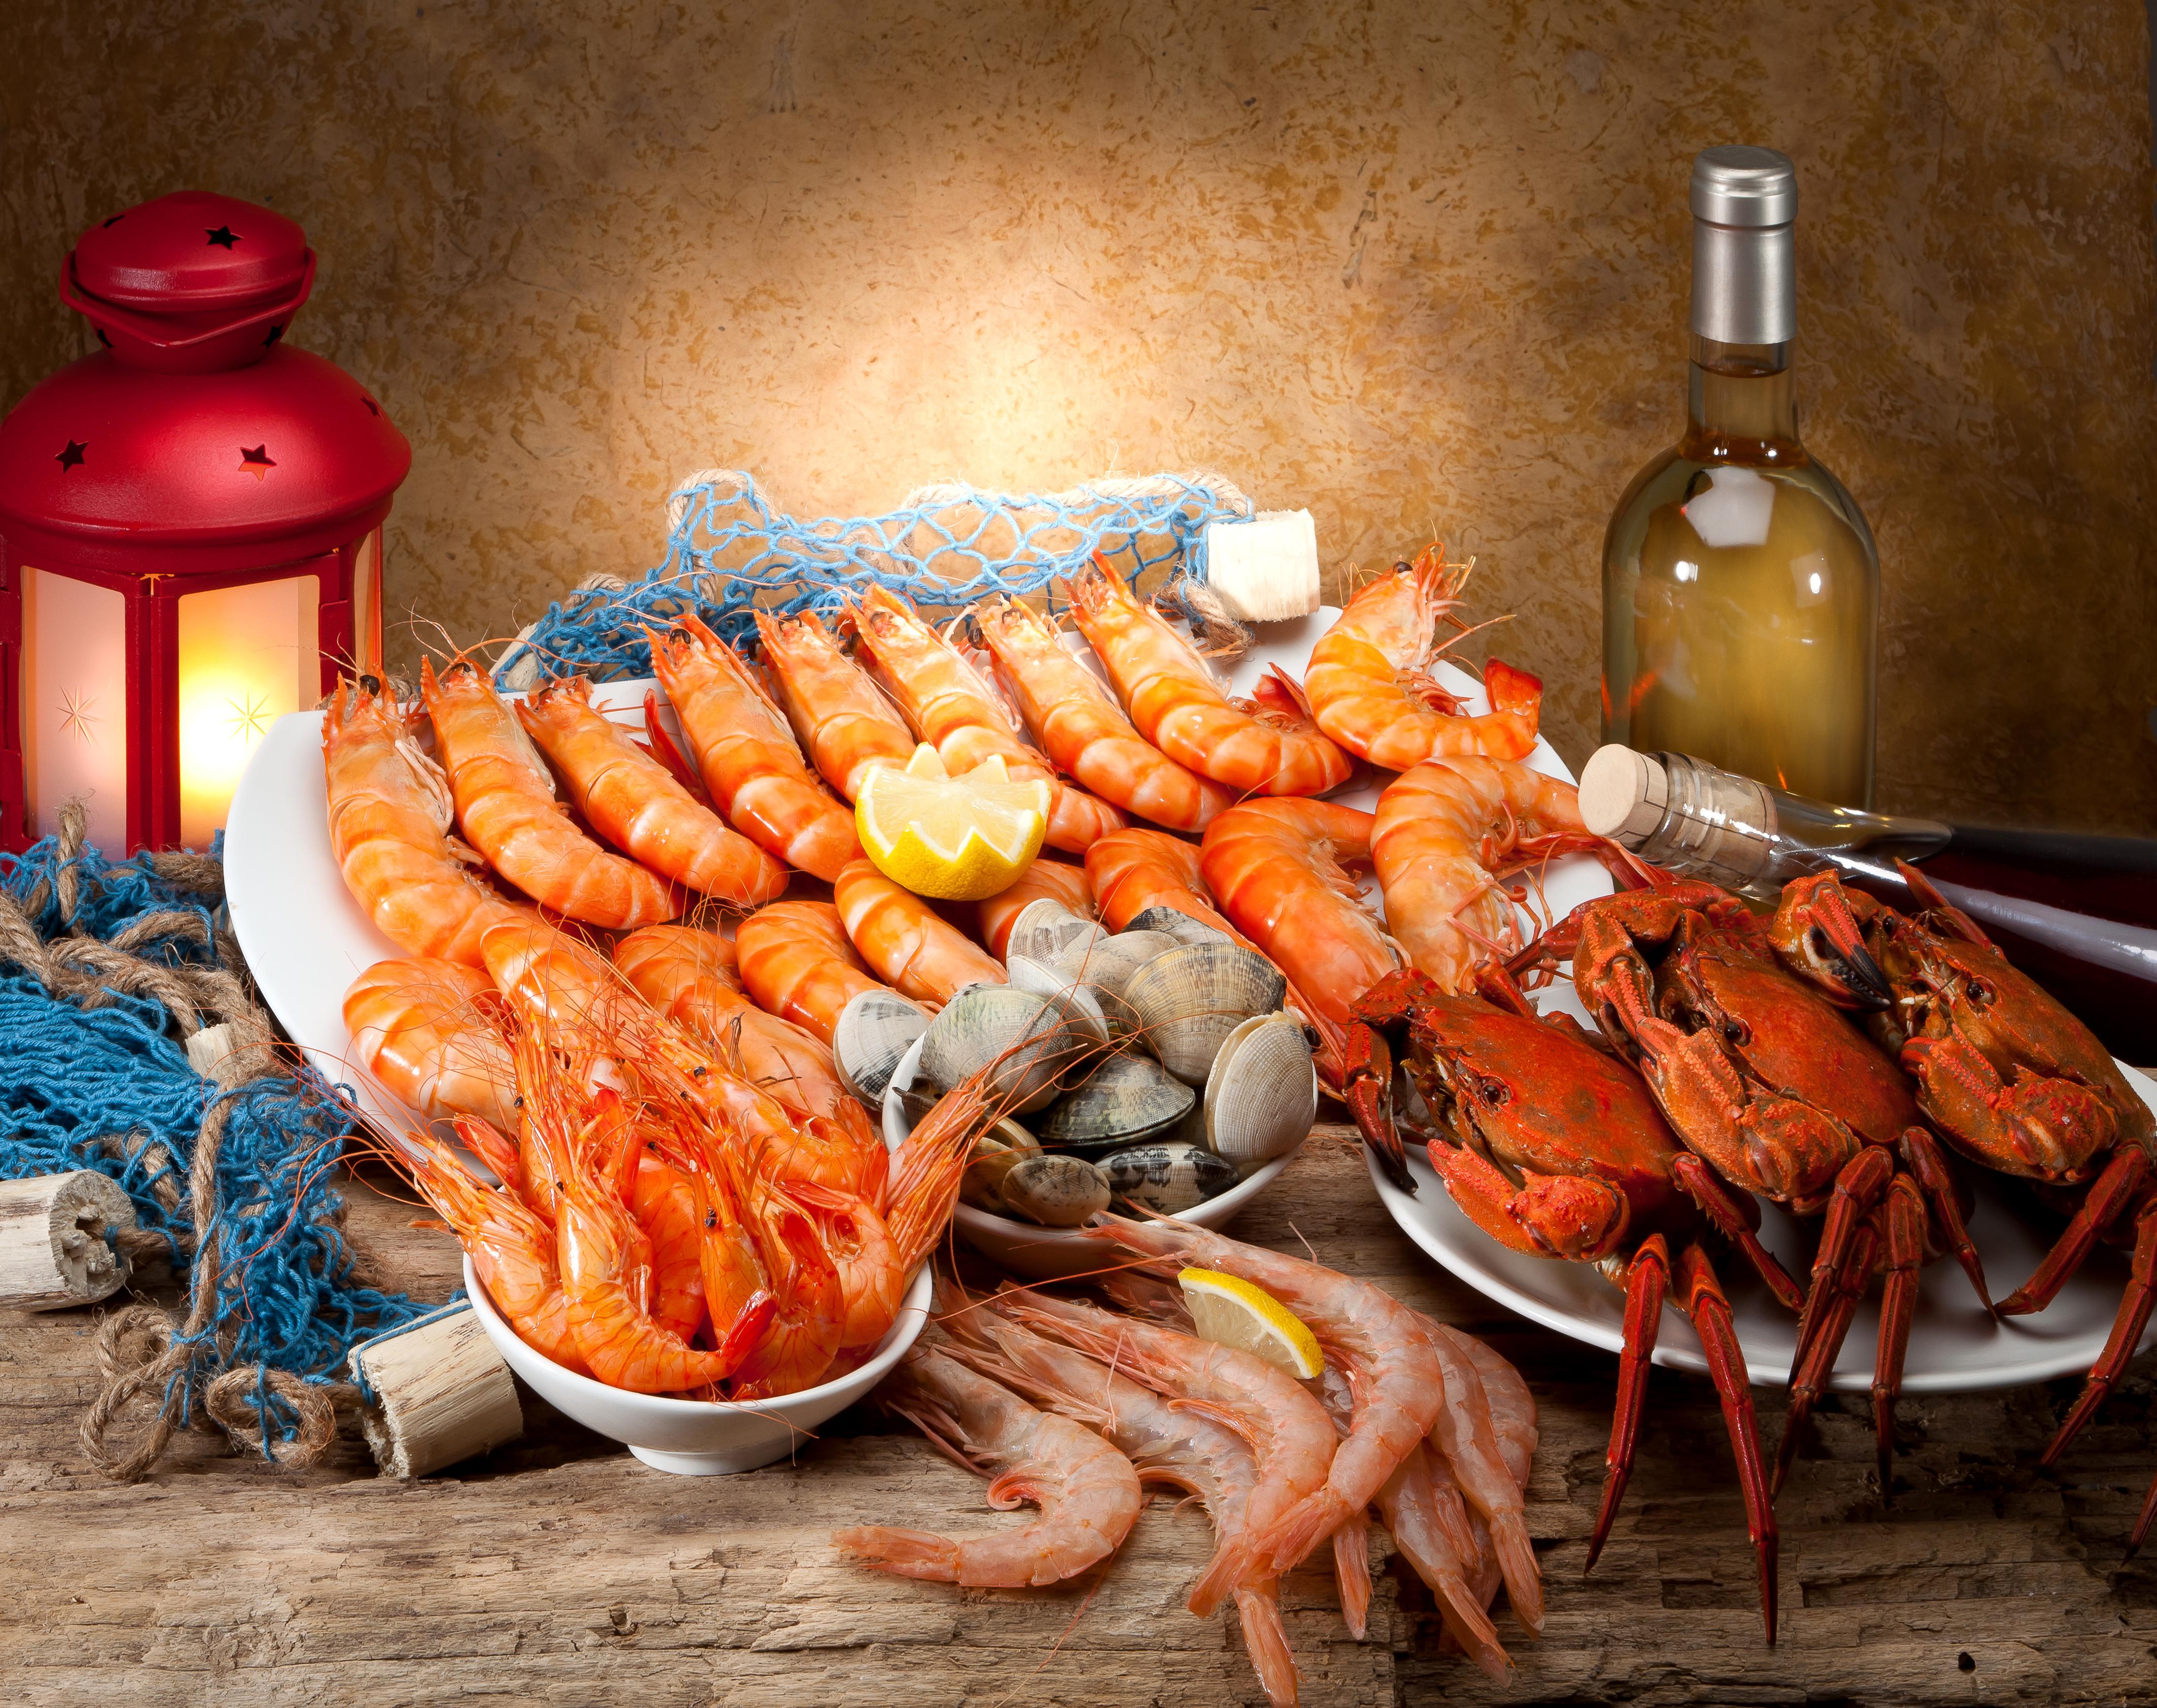 Seafood 4k Ultra HD Wallpaper. Background Imagex3368